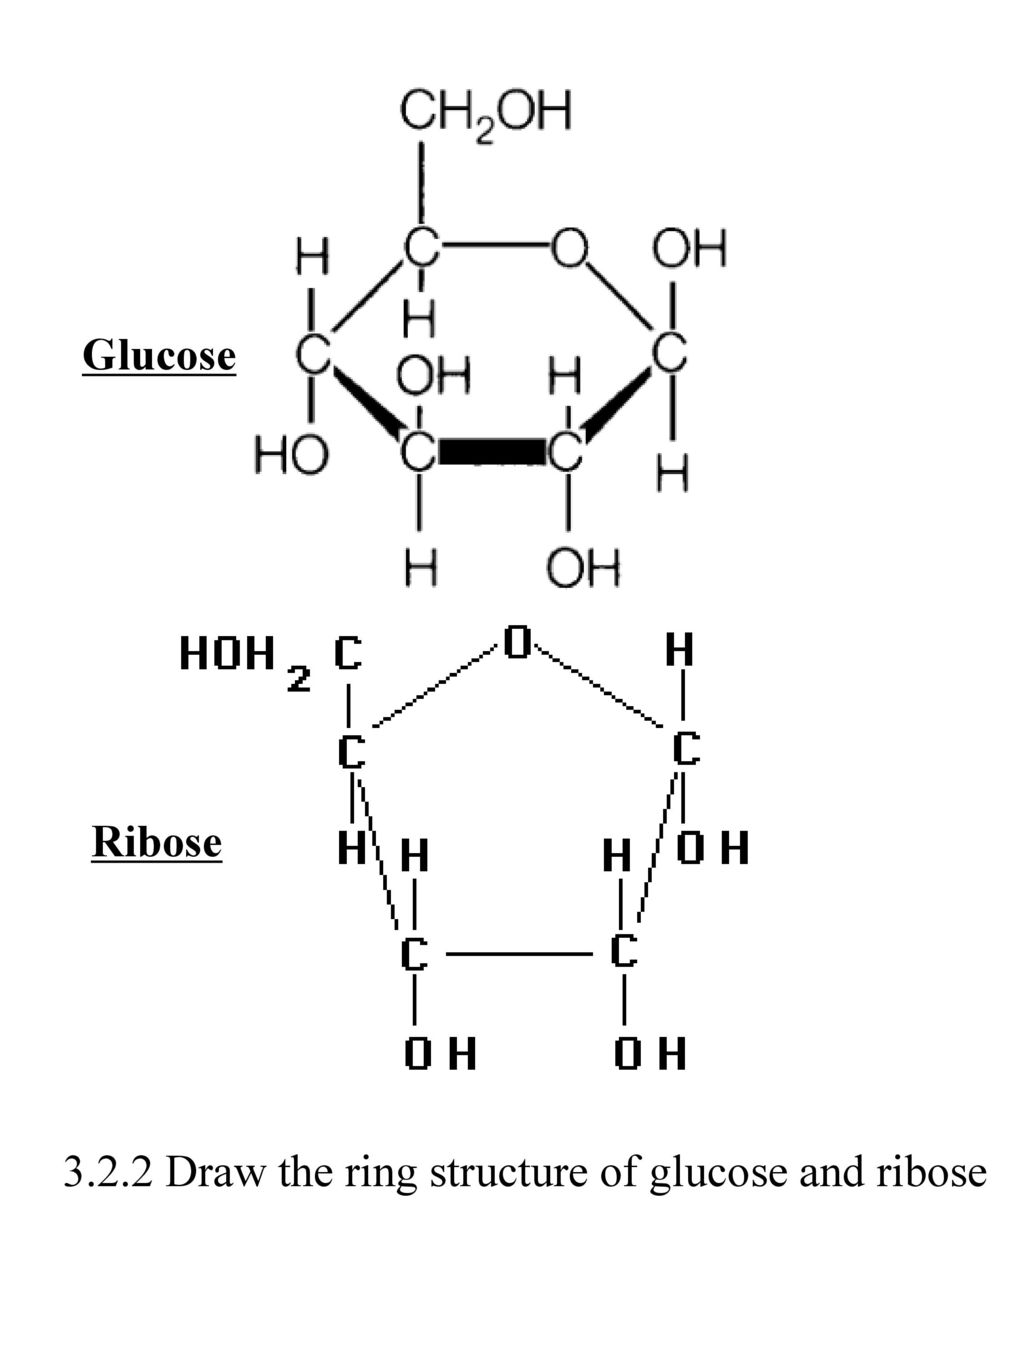 Сахар рибоза. Glucose Ring structure. Molecular structure of glucose. Глюкоза и рибоза. Рибоза пептид.